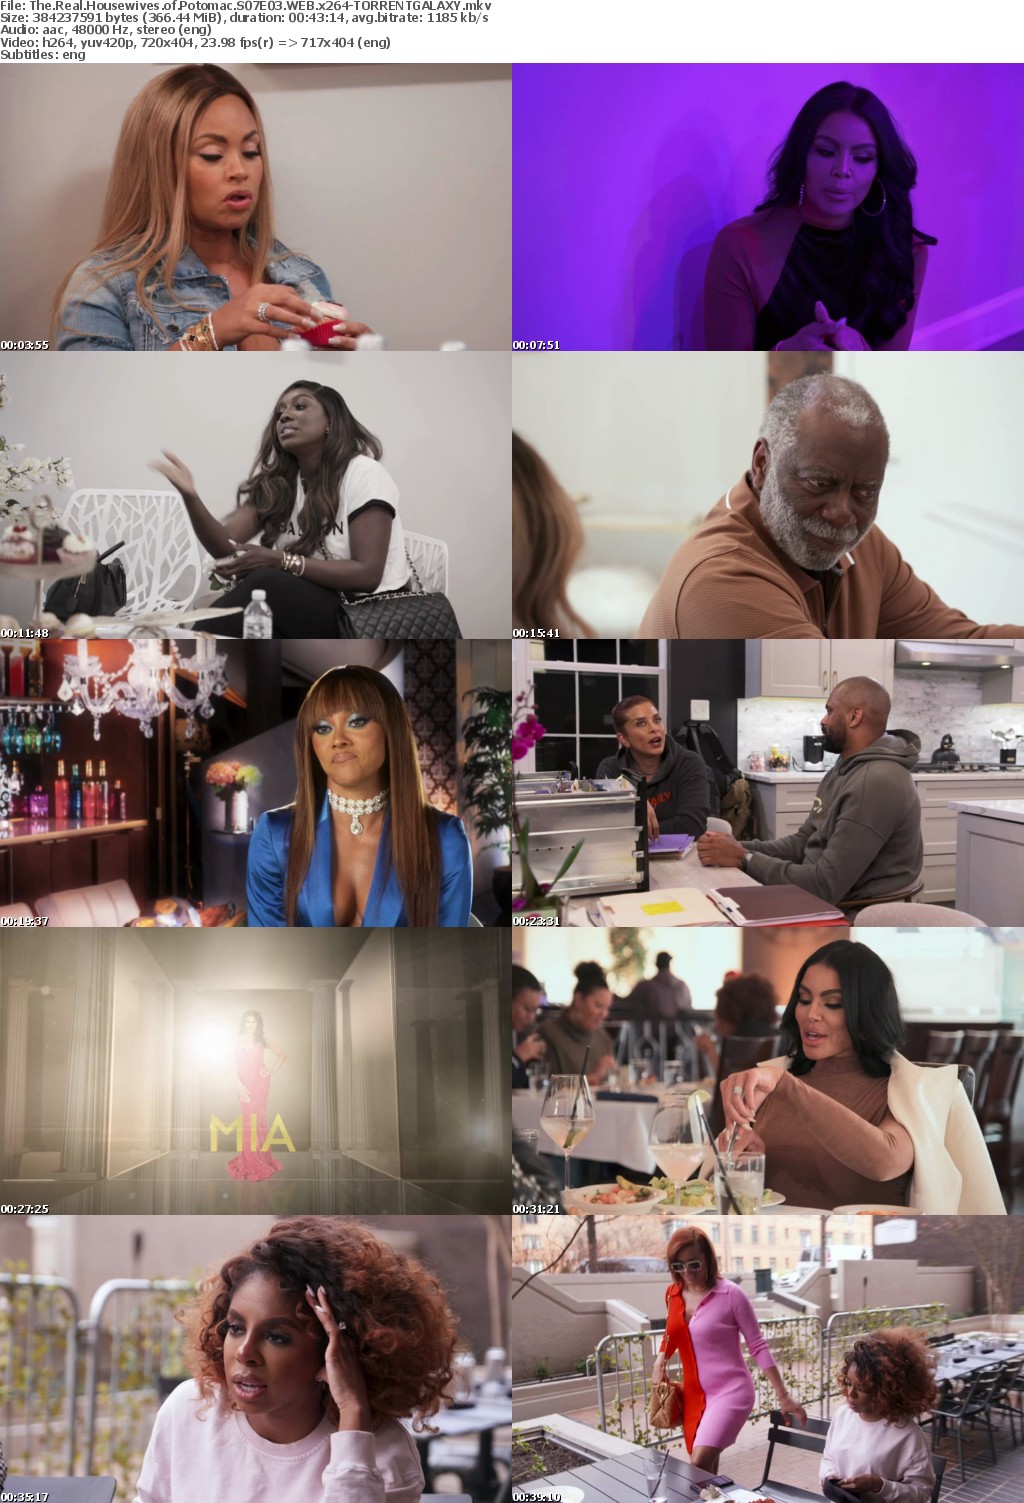 The Real Housewives of Potomac S07E03 WEB x264-GALAXY